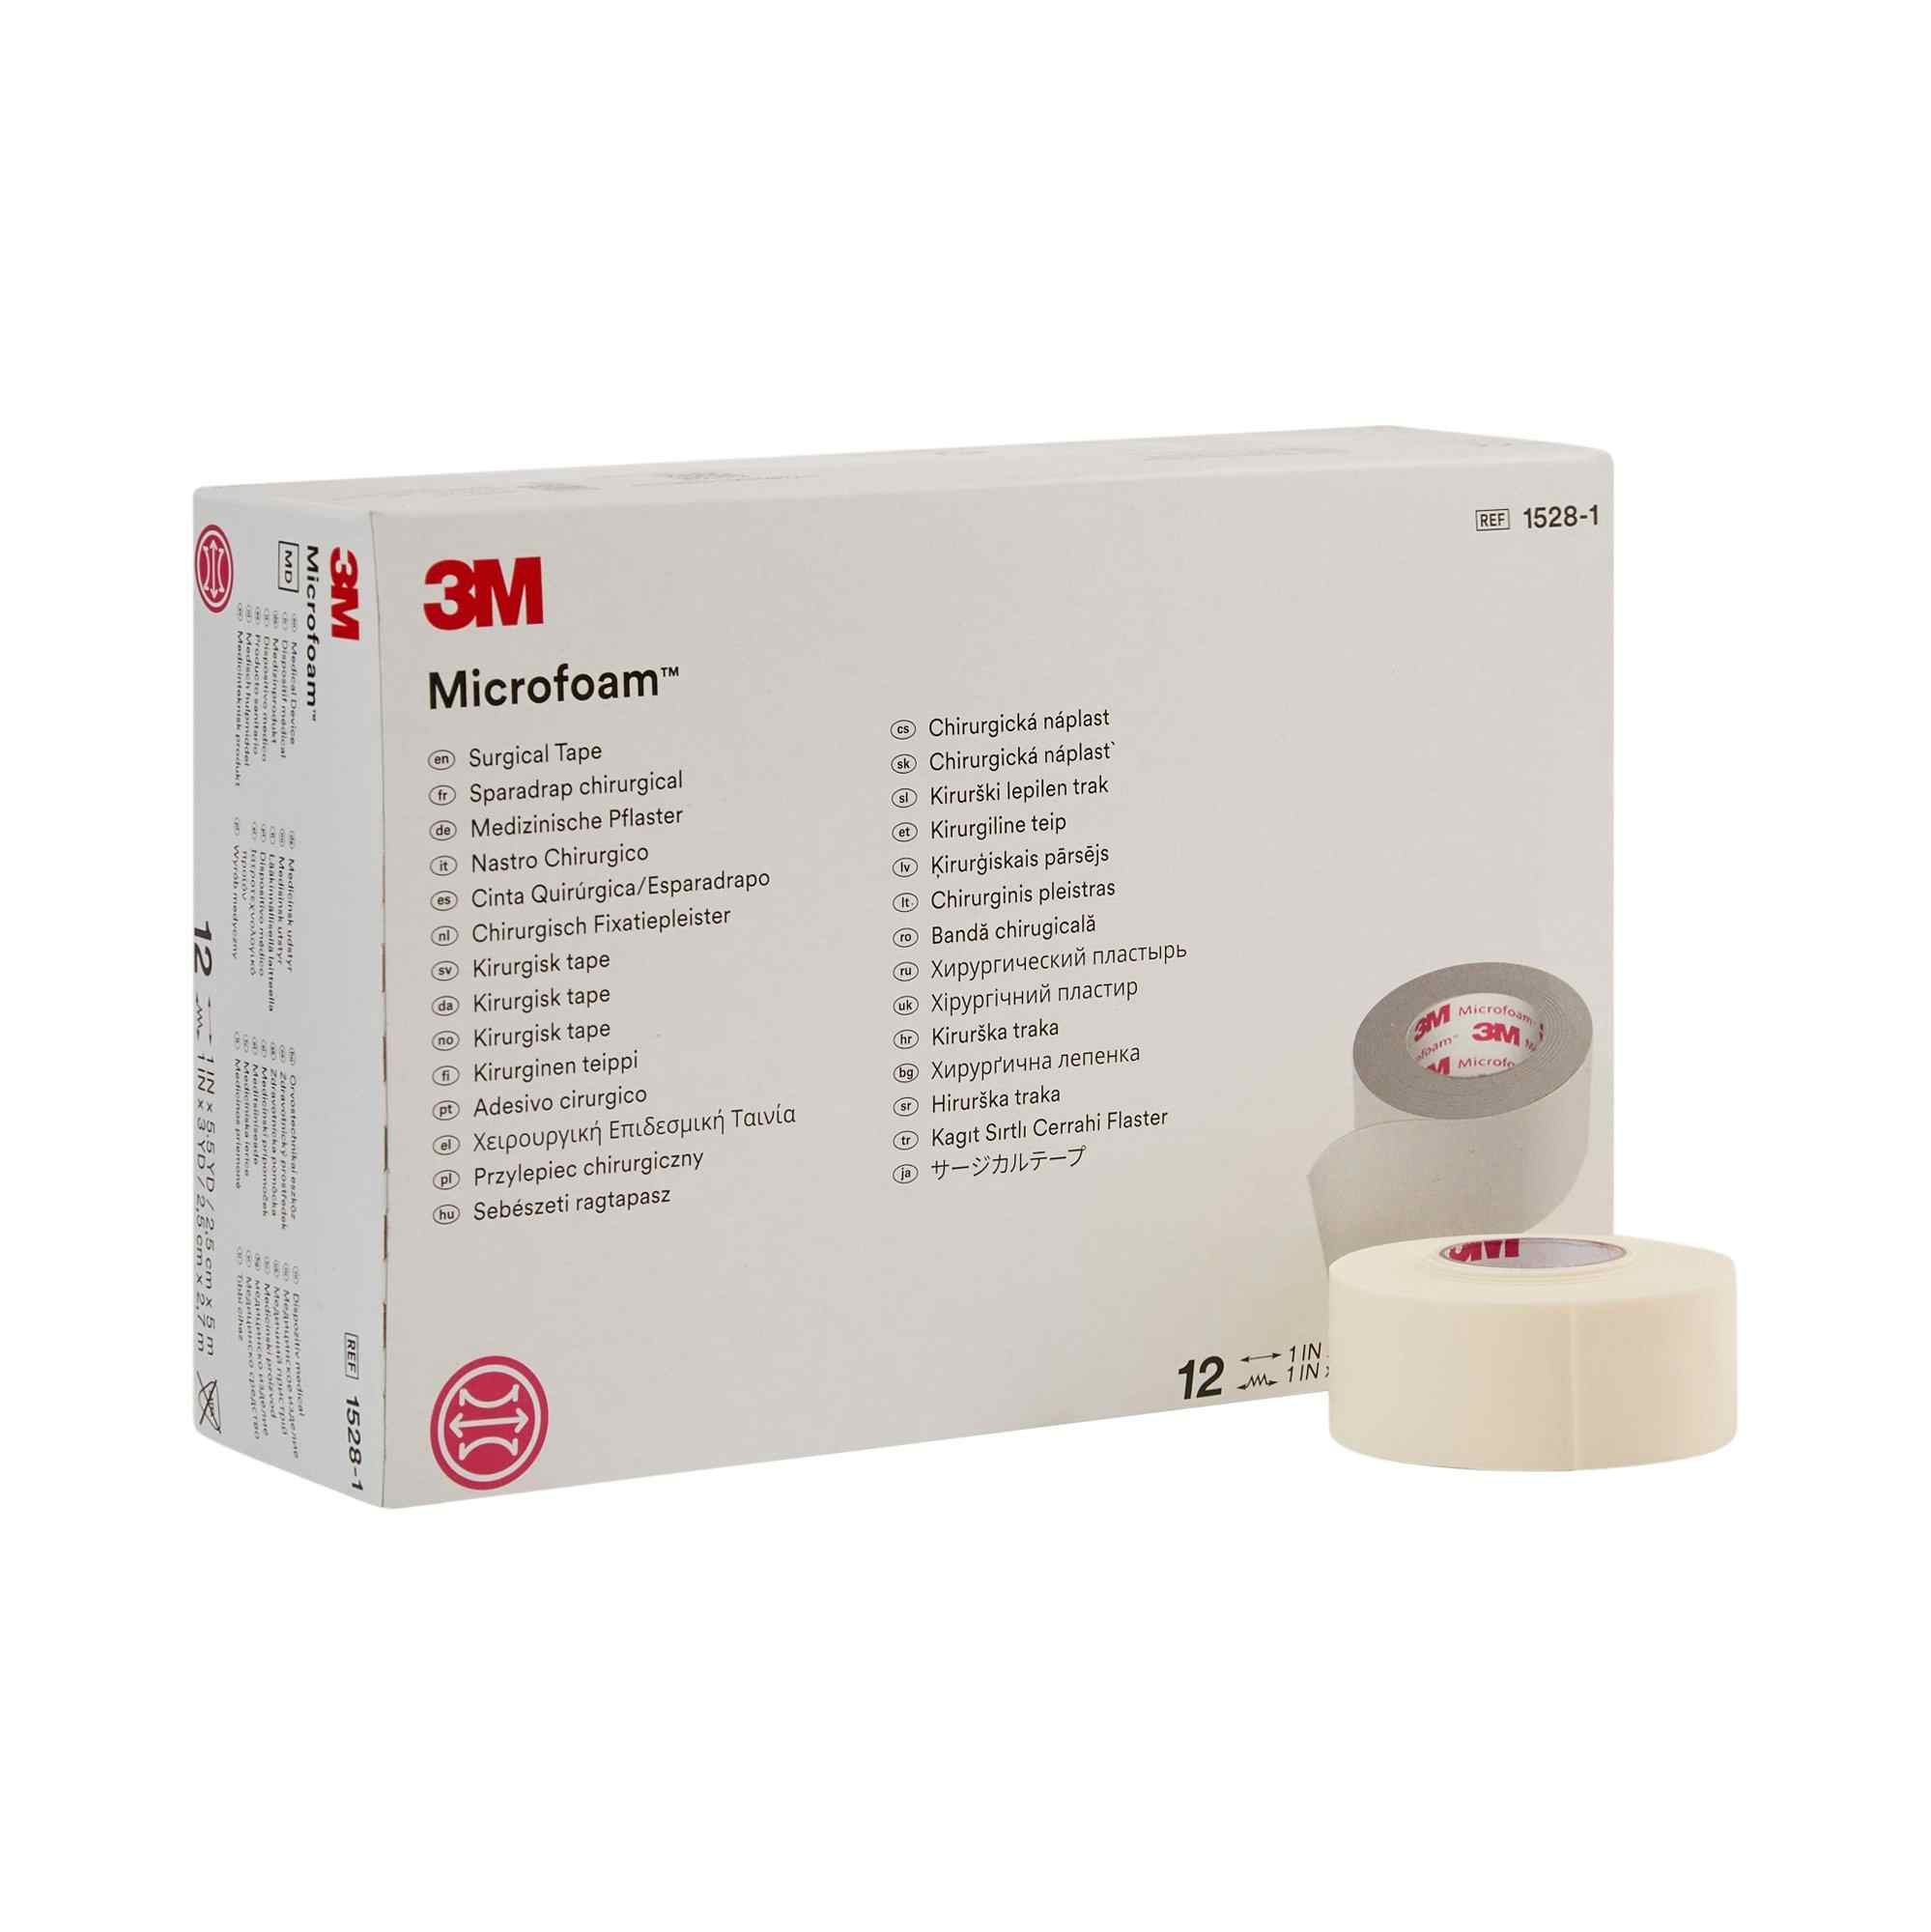 3M Microfoam Surgical Tape, Water-Resistant, Foam/Acrylic Adhesive, Elastic, 1 Inch x 5½ Yard, White